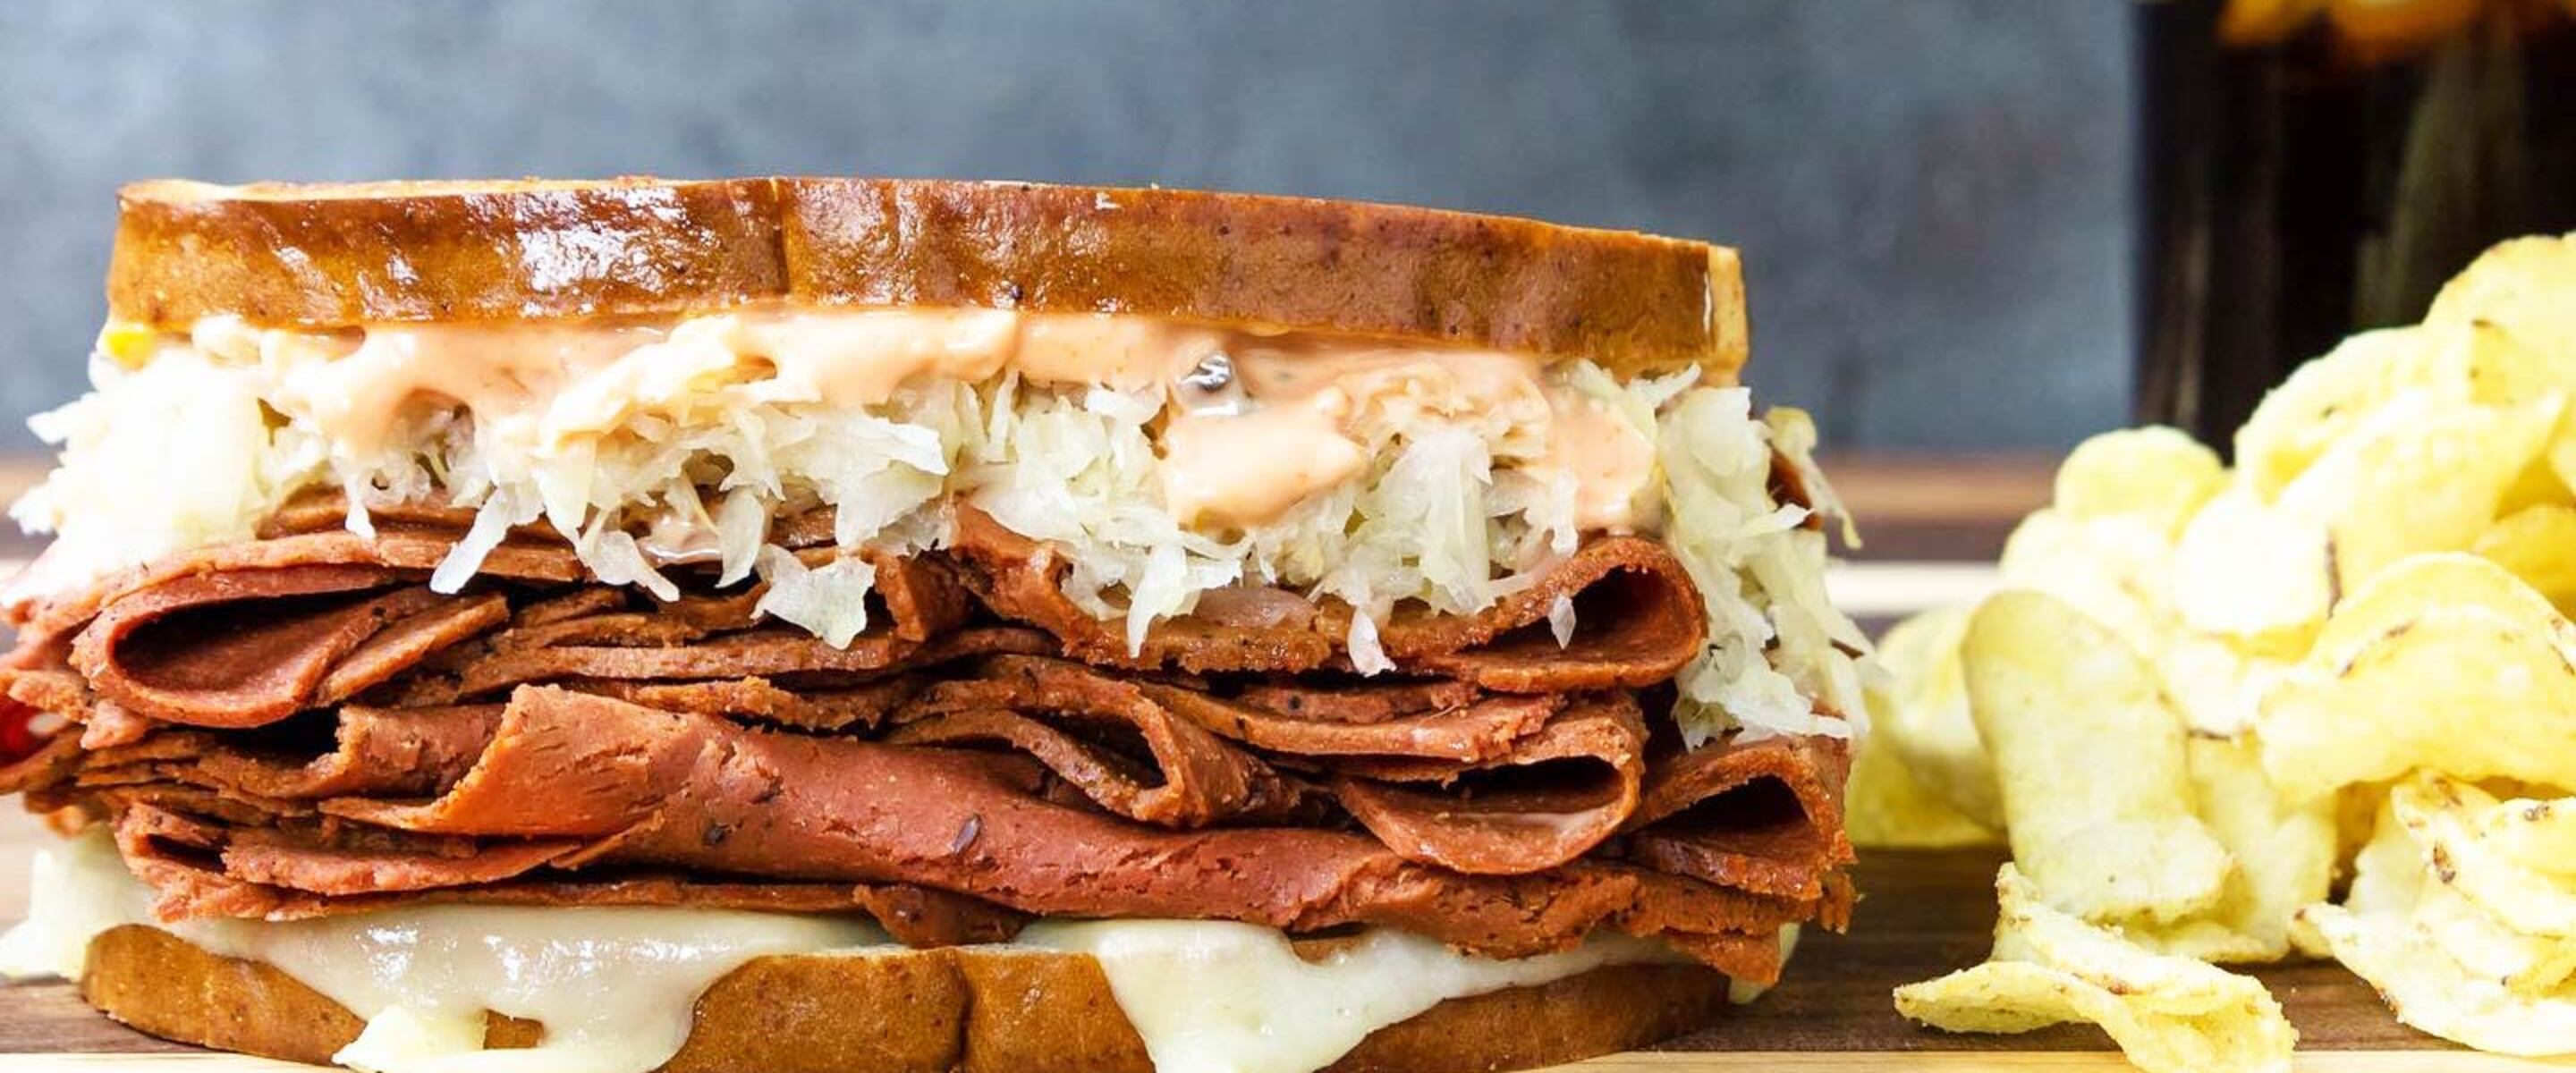 Yes, You Can Enjoy Jewish Delis and Traditional Meats as a Vegan